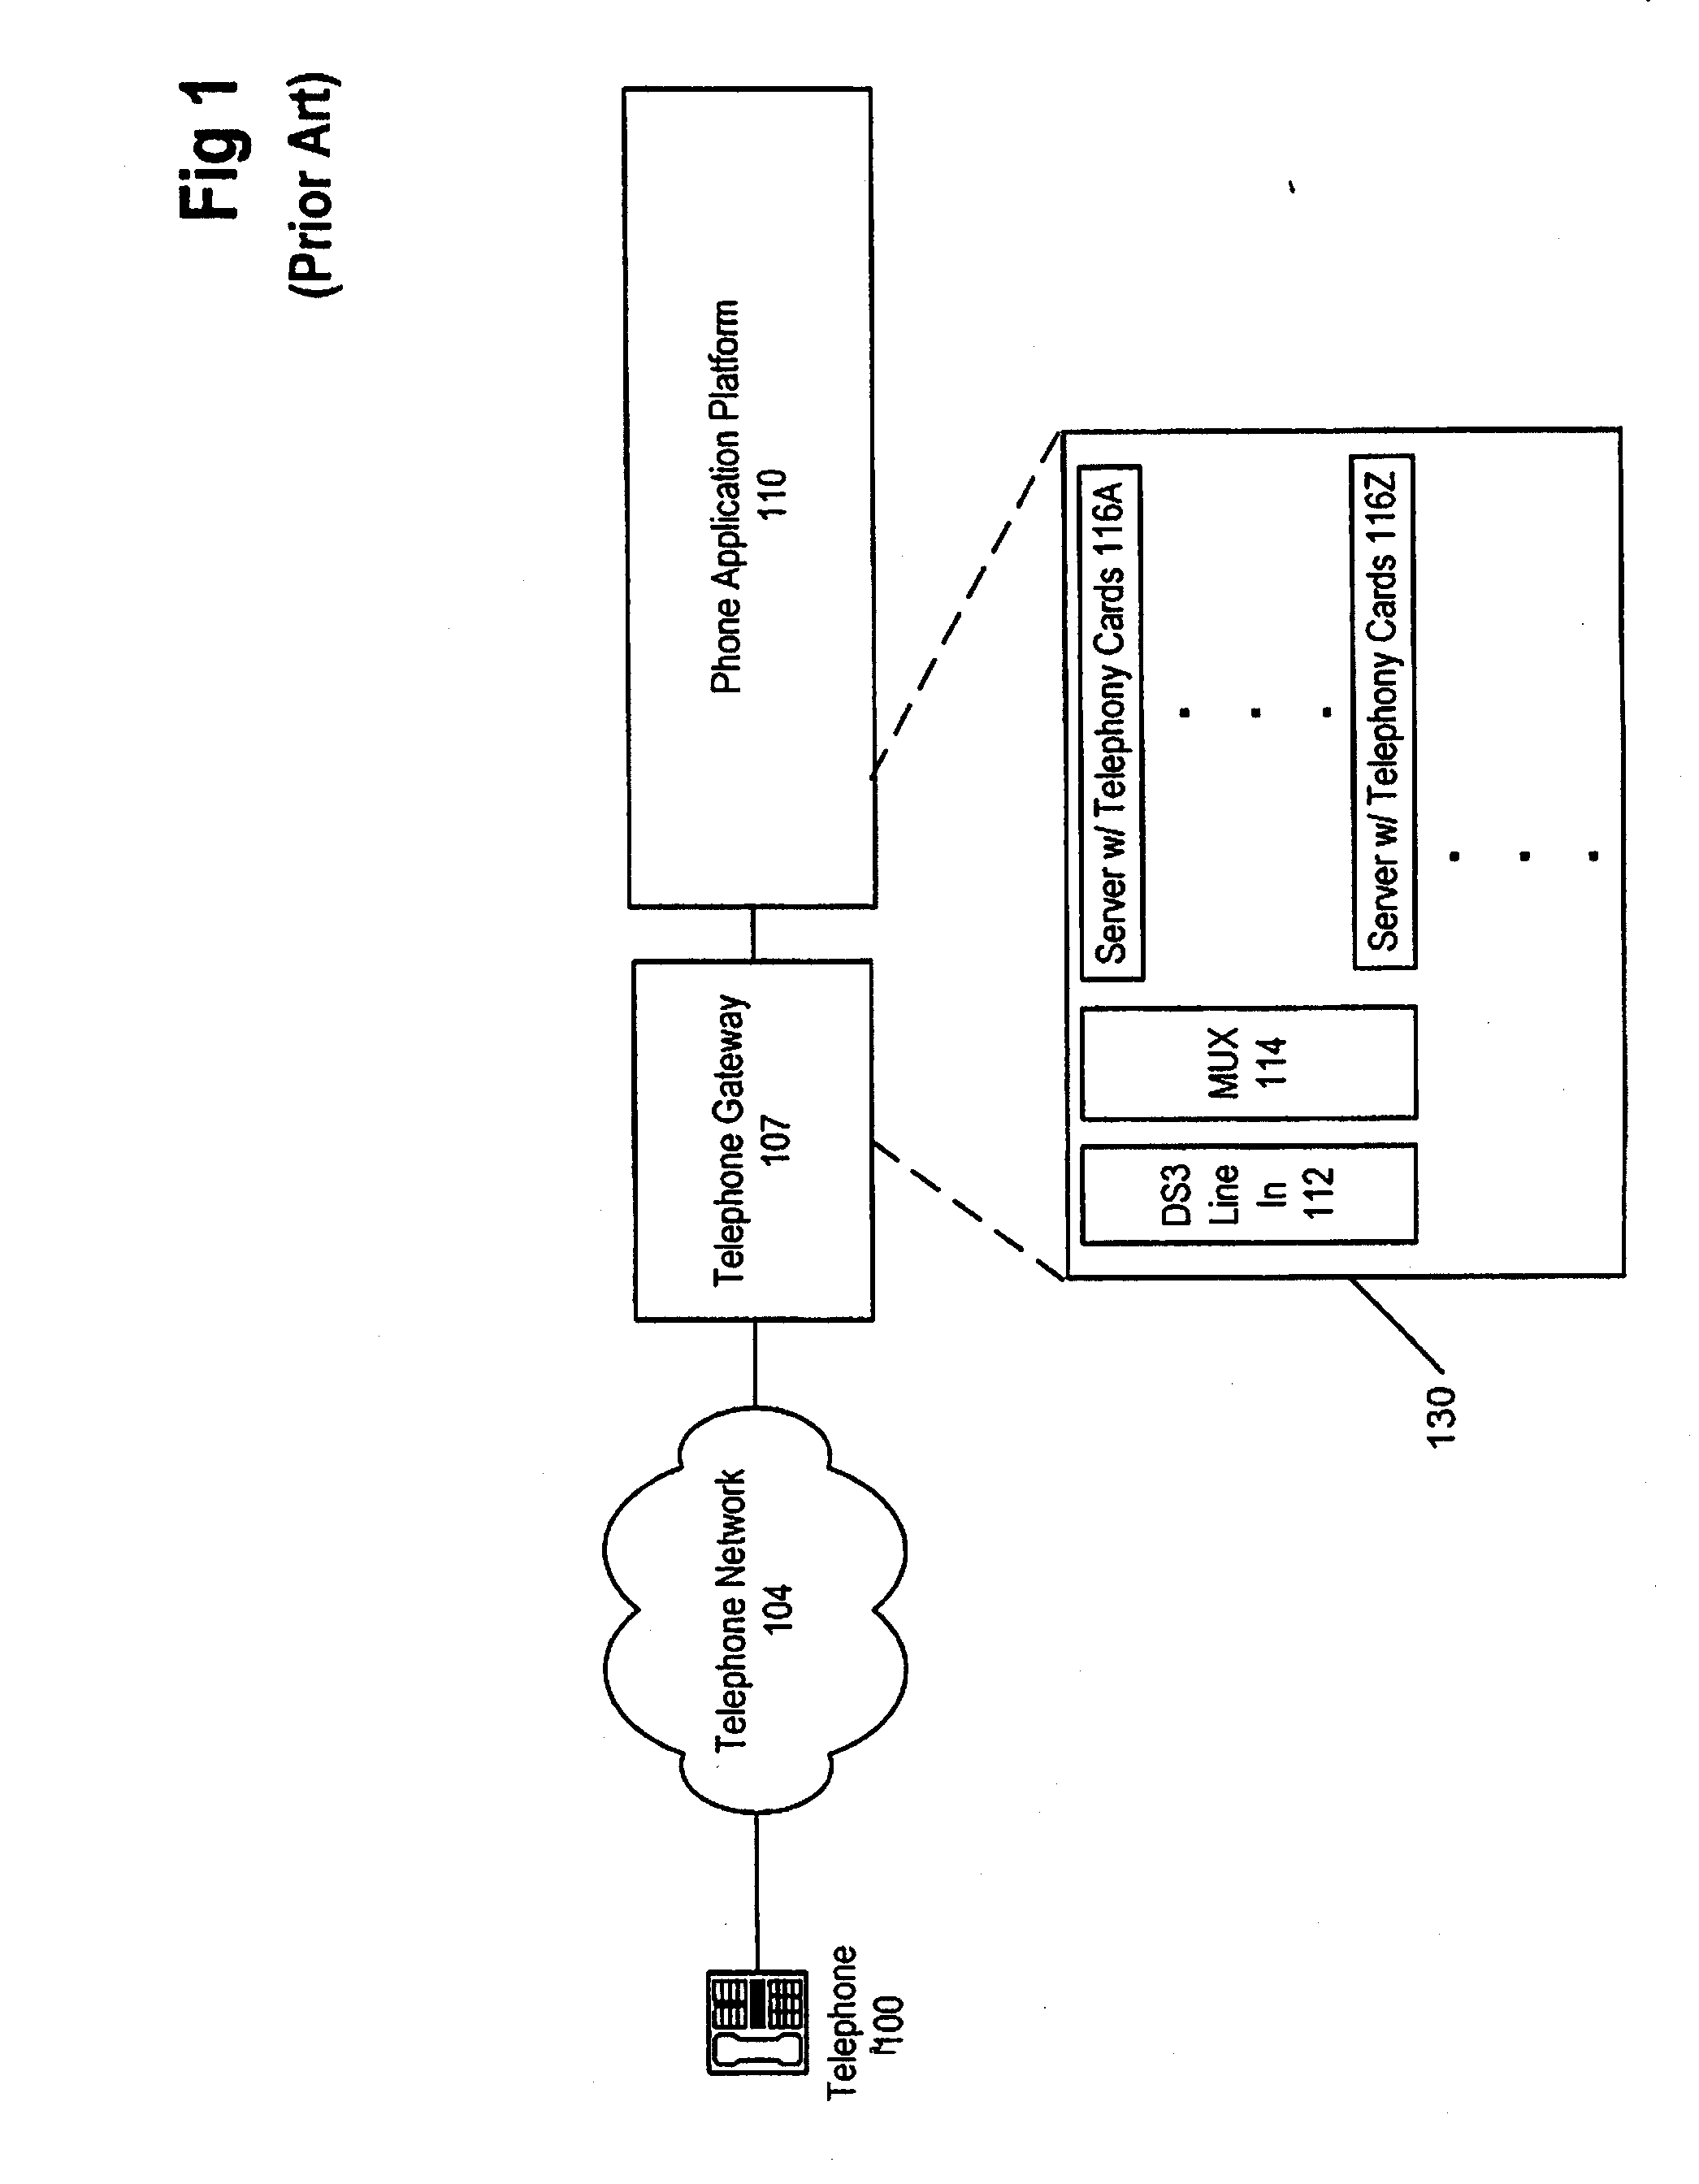 Method and apparatus for localized voice over internet protocol usage